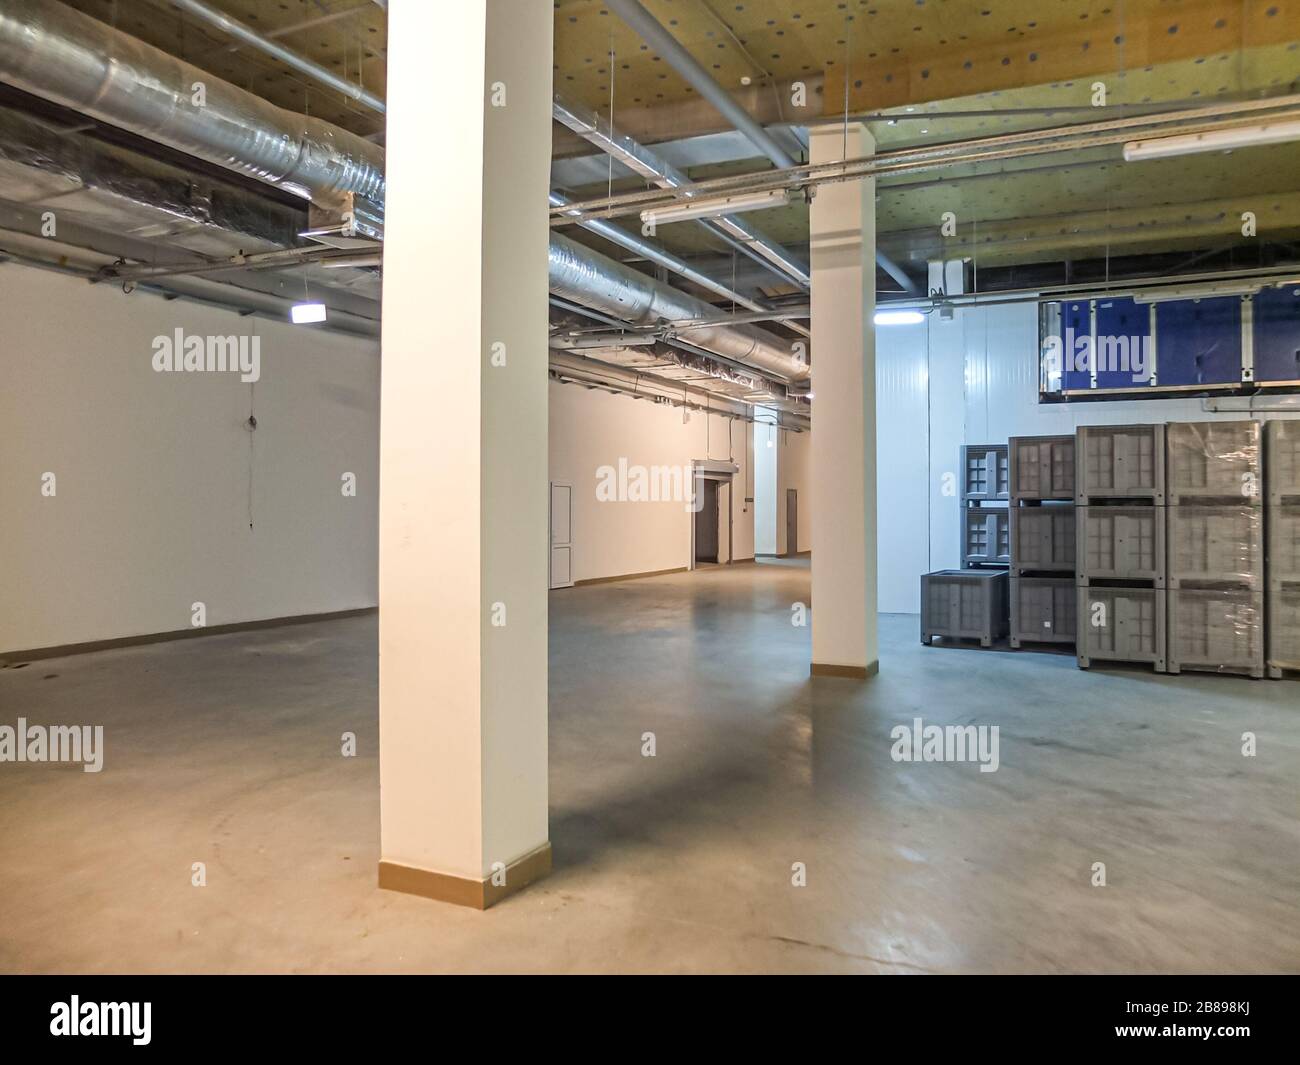 Pipelines for air conditioning and ventilation systems under the roof of a modern warehouse Stock Photo